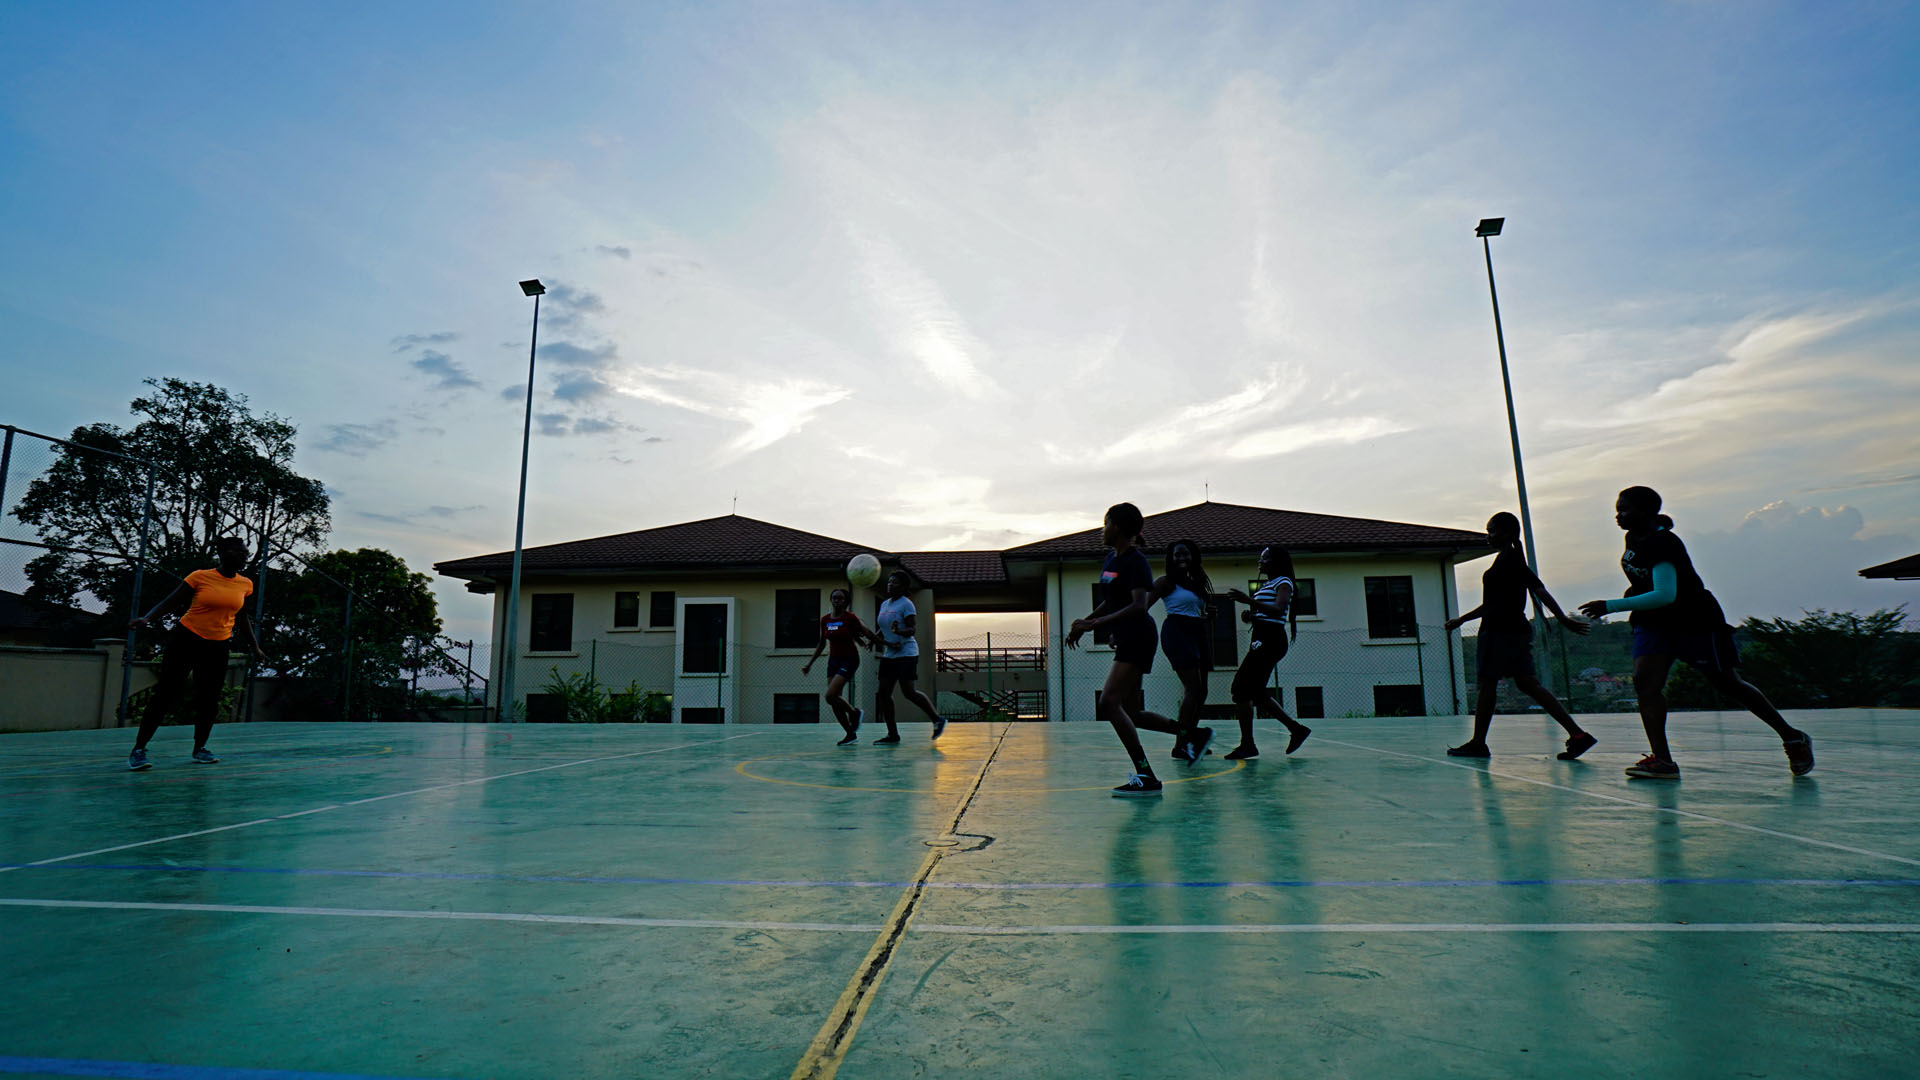 Multipurpose Spaces for Sports